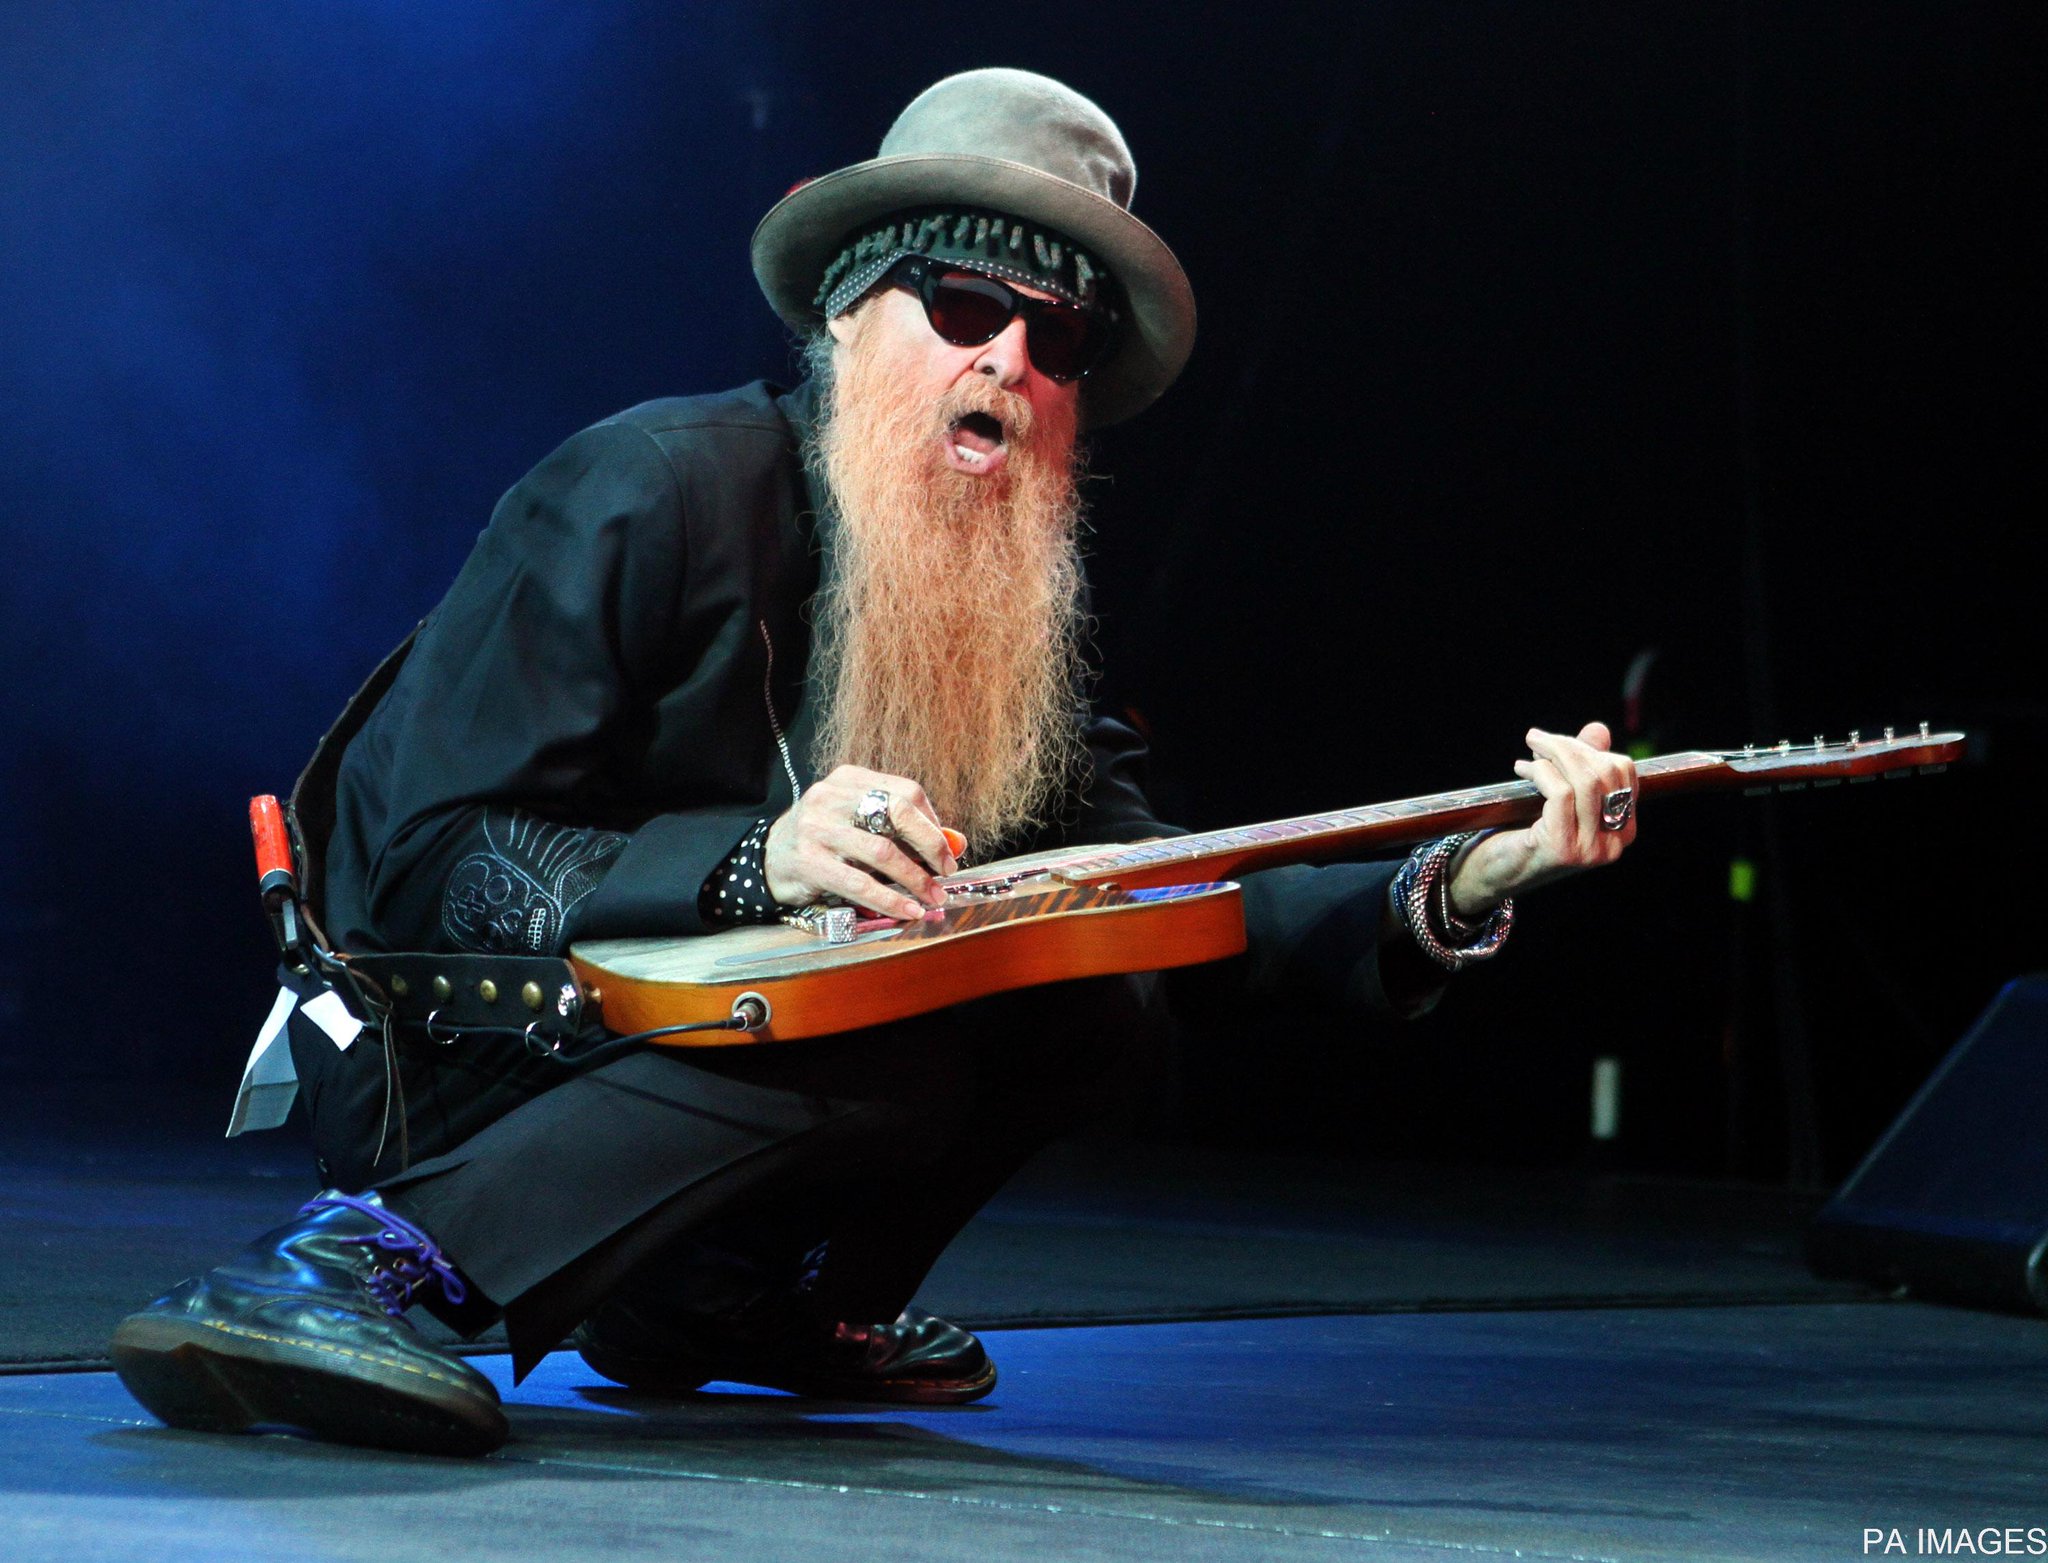 A big Happy Birthday to sharp dressed man, Billy Gibbons of on his 65th! He just cant stop rockin! 